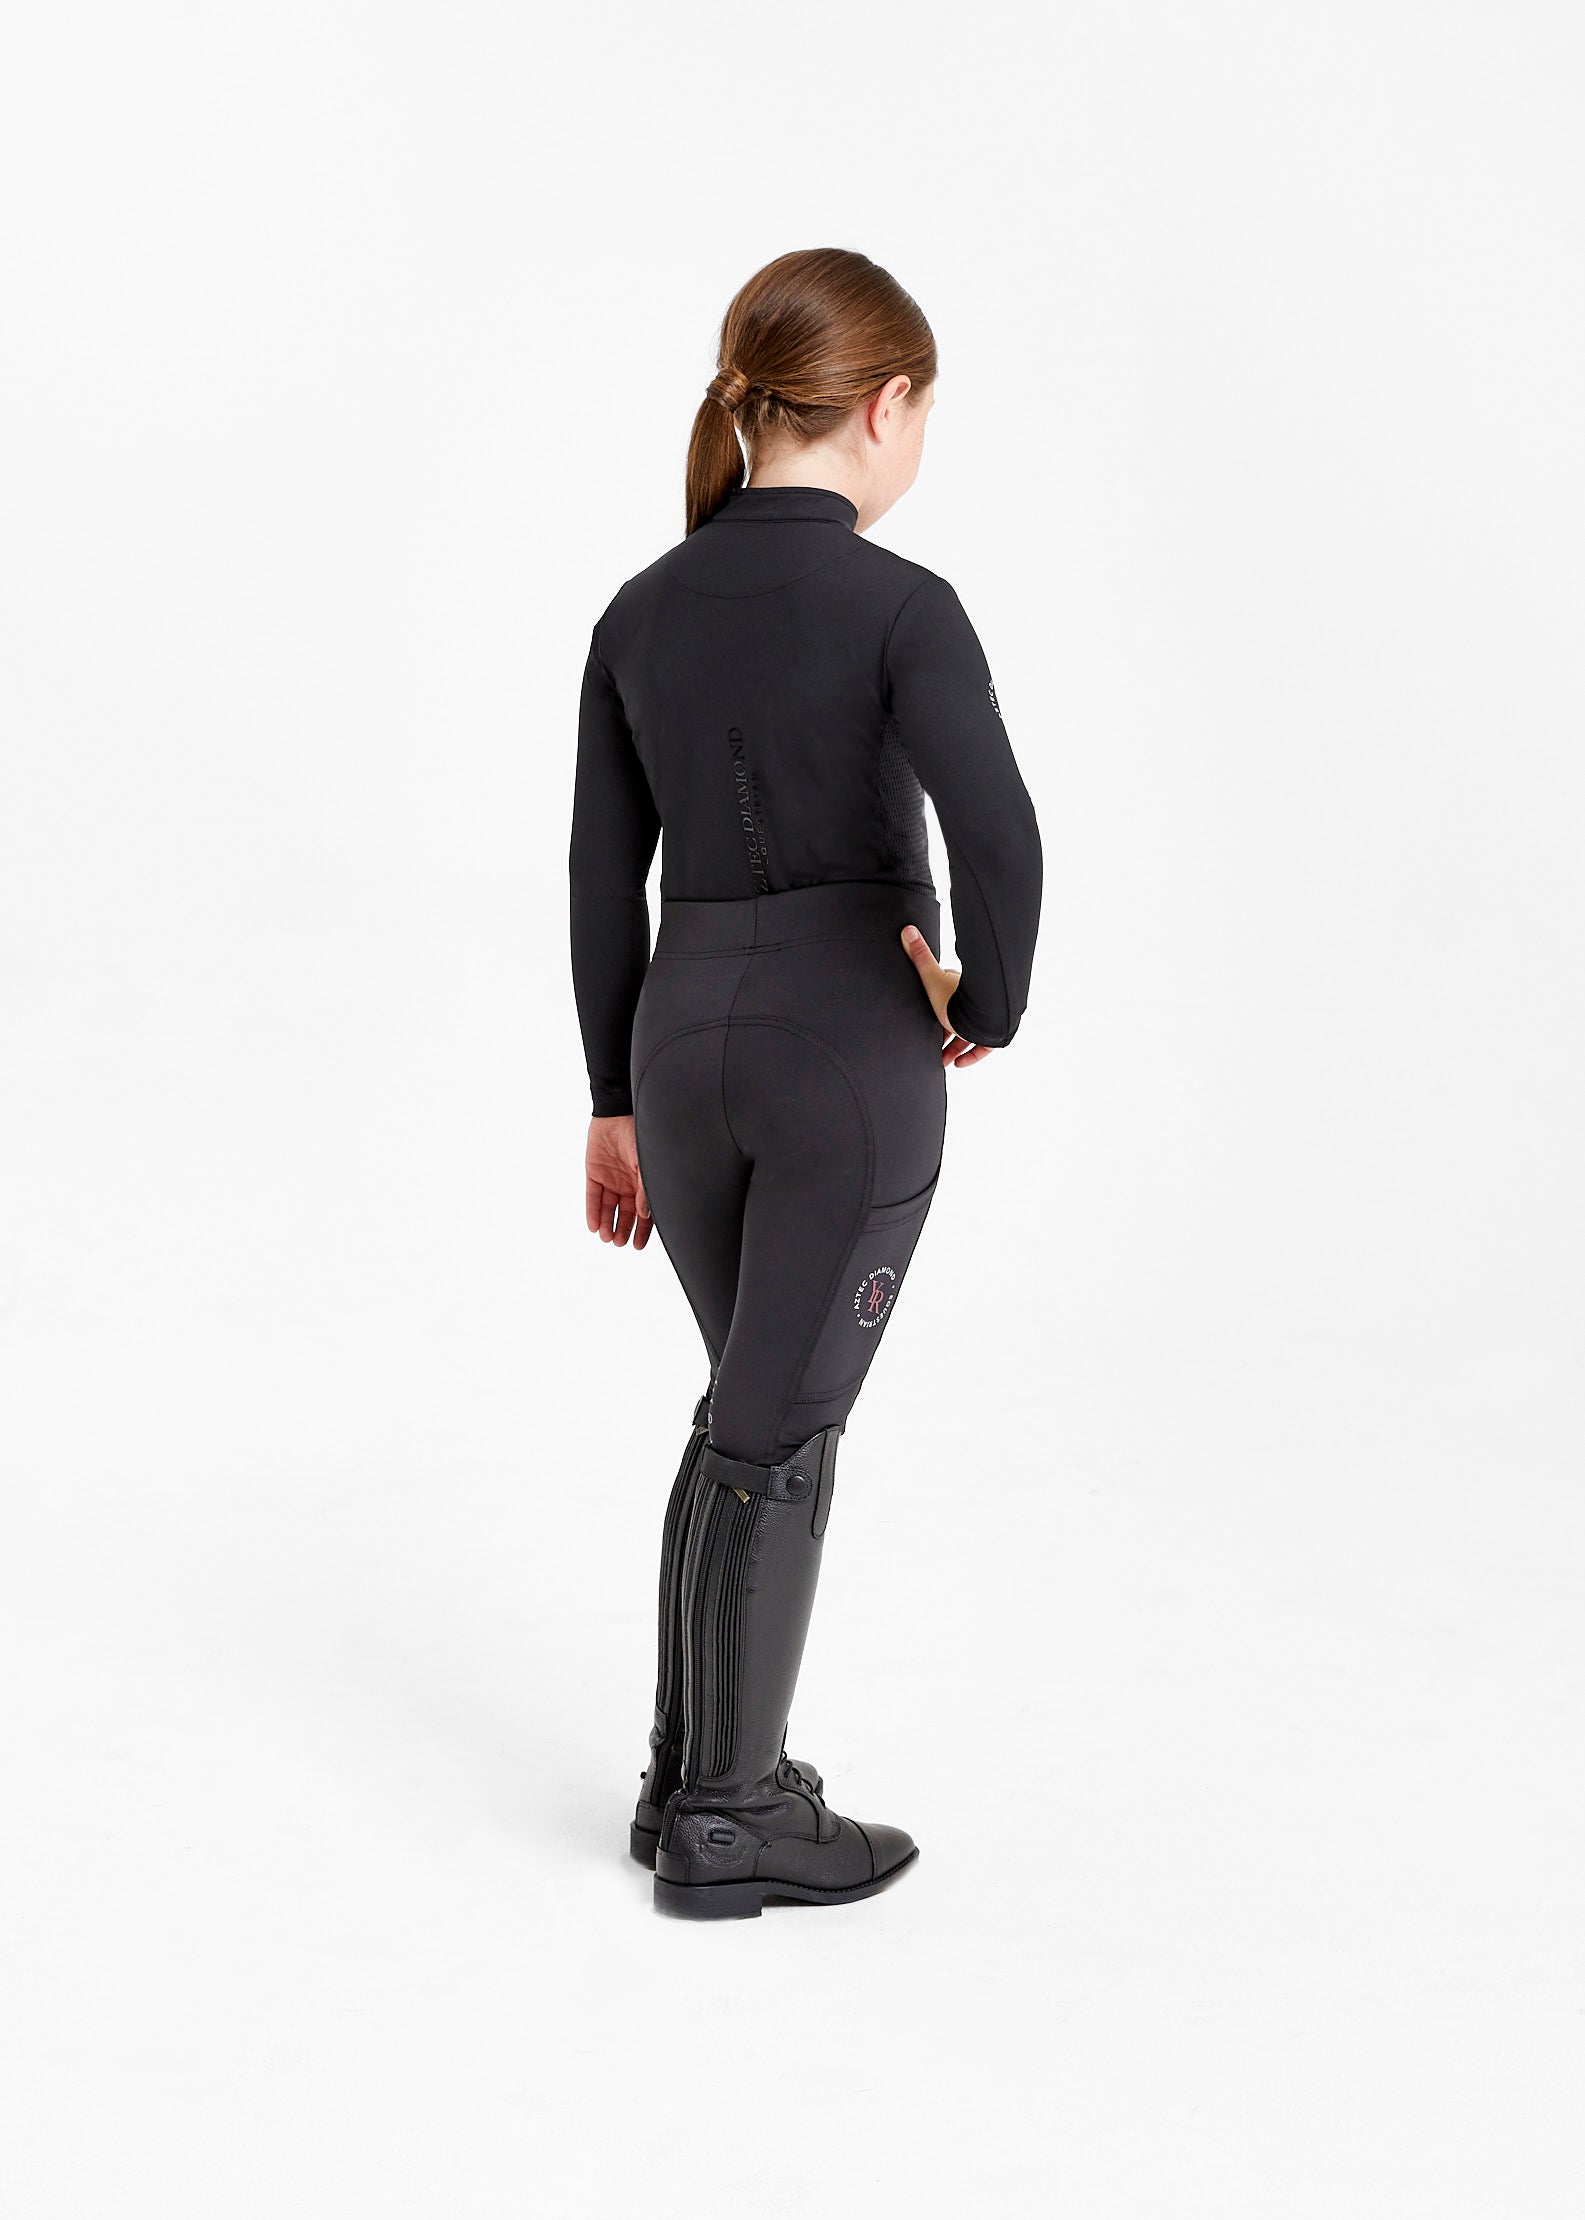 Navy SS17 Technical Stretch Leggings – Aztec Diamond Equestrian (UK)  Limited | Riding outfit, Equestrian hoodie, Equestrian outfits